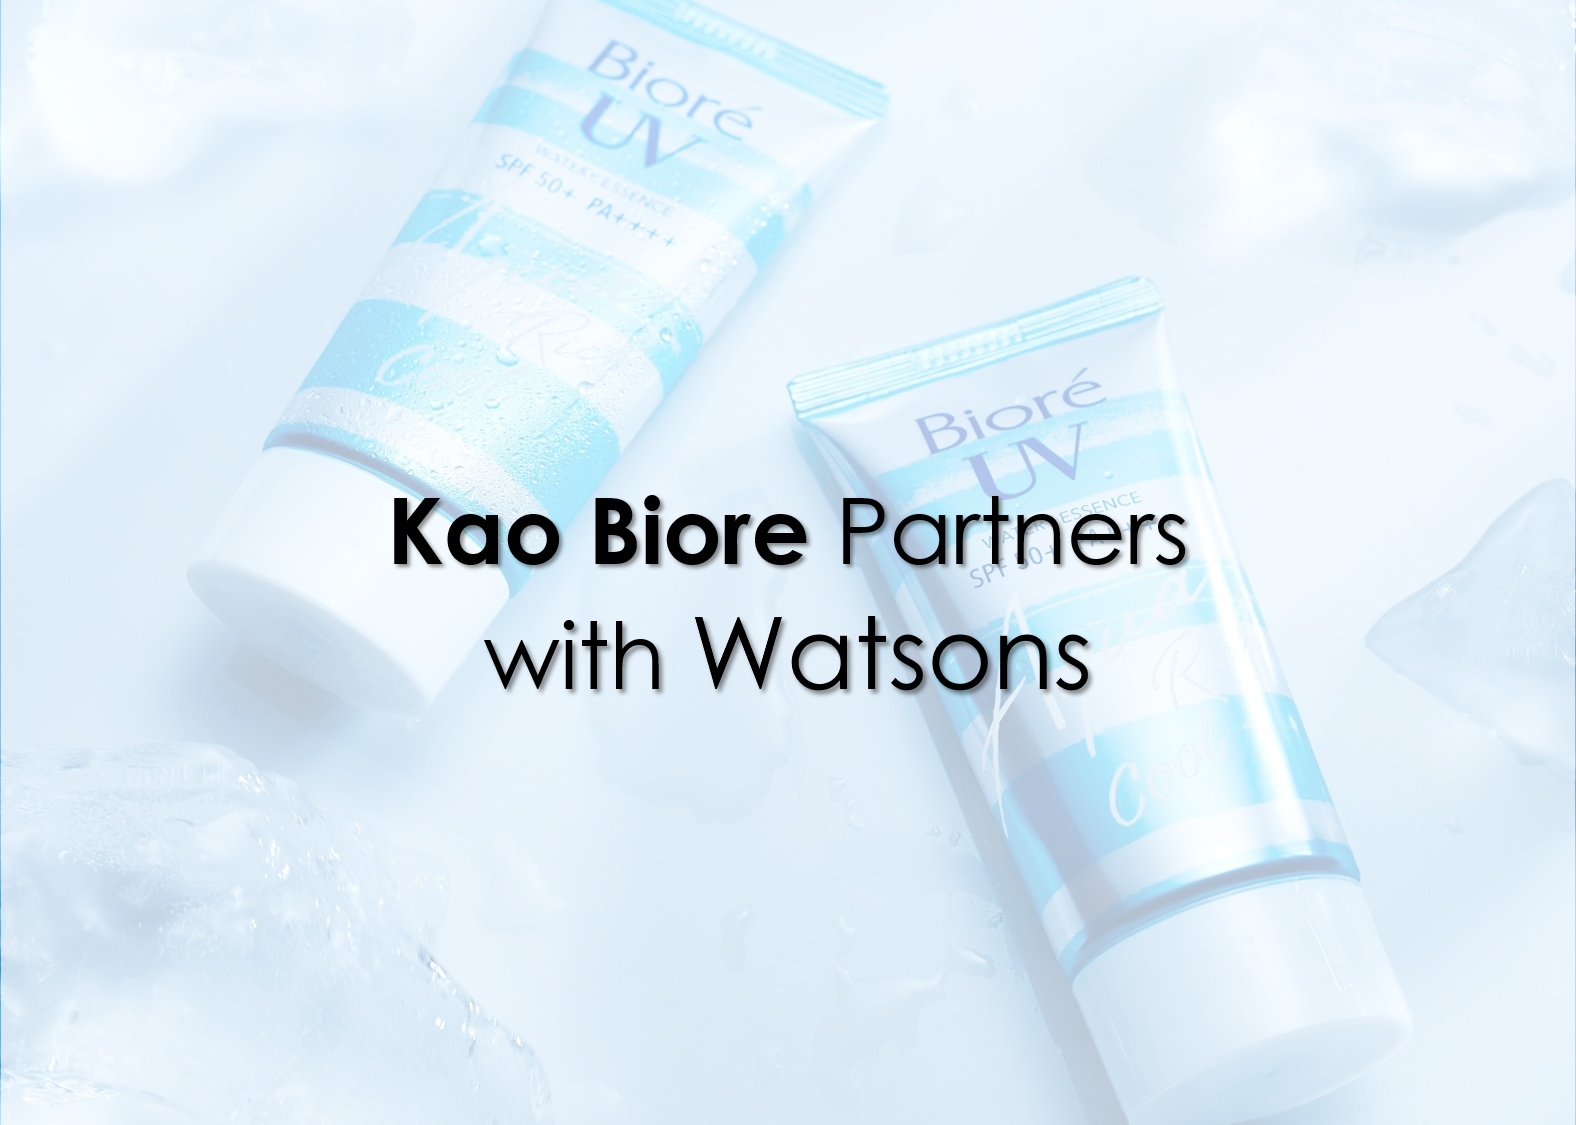 Kao Biore partners with Watsons to run campaign - D38 Ecommerce Agency